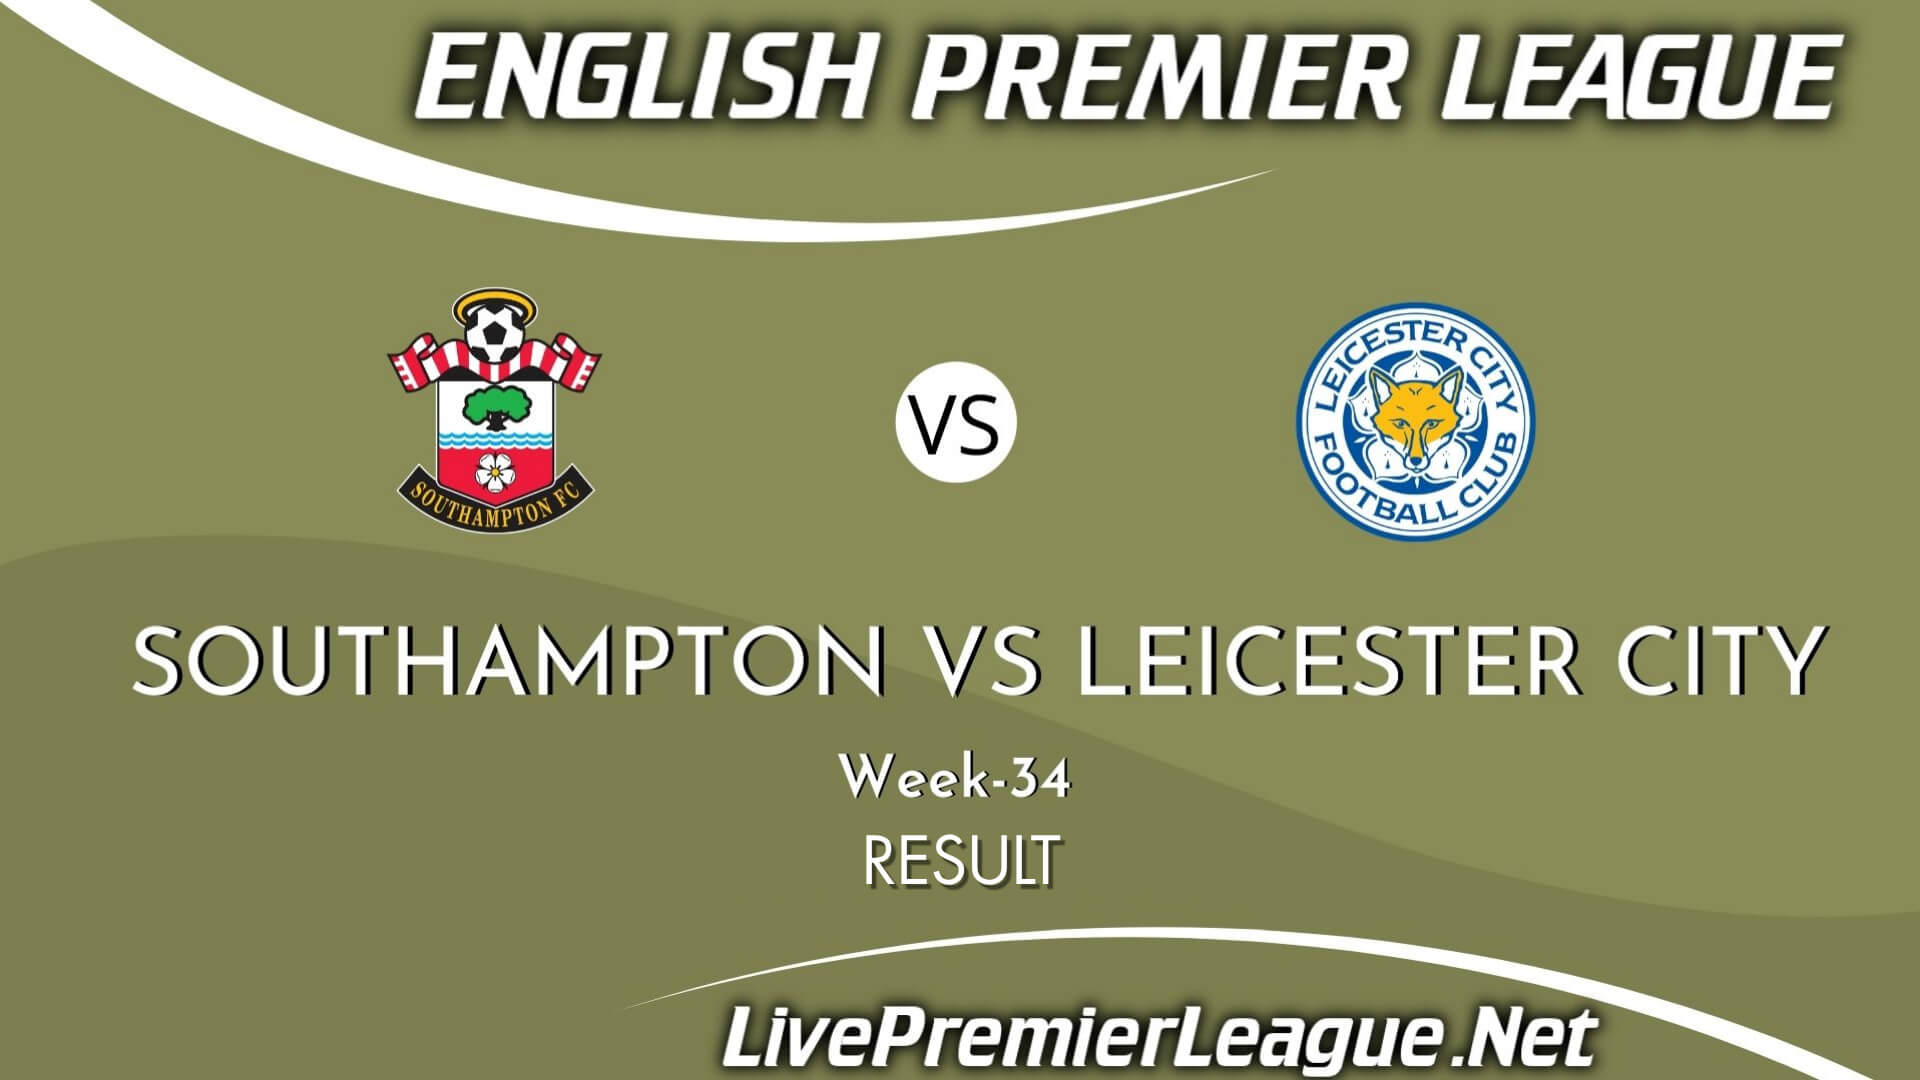 Southampton Vs Leicester City Result 2021 | EPL Week 34